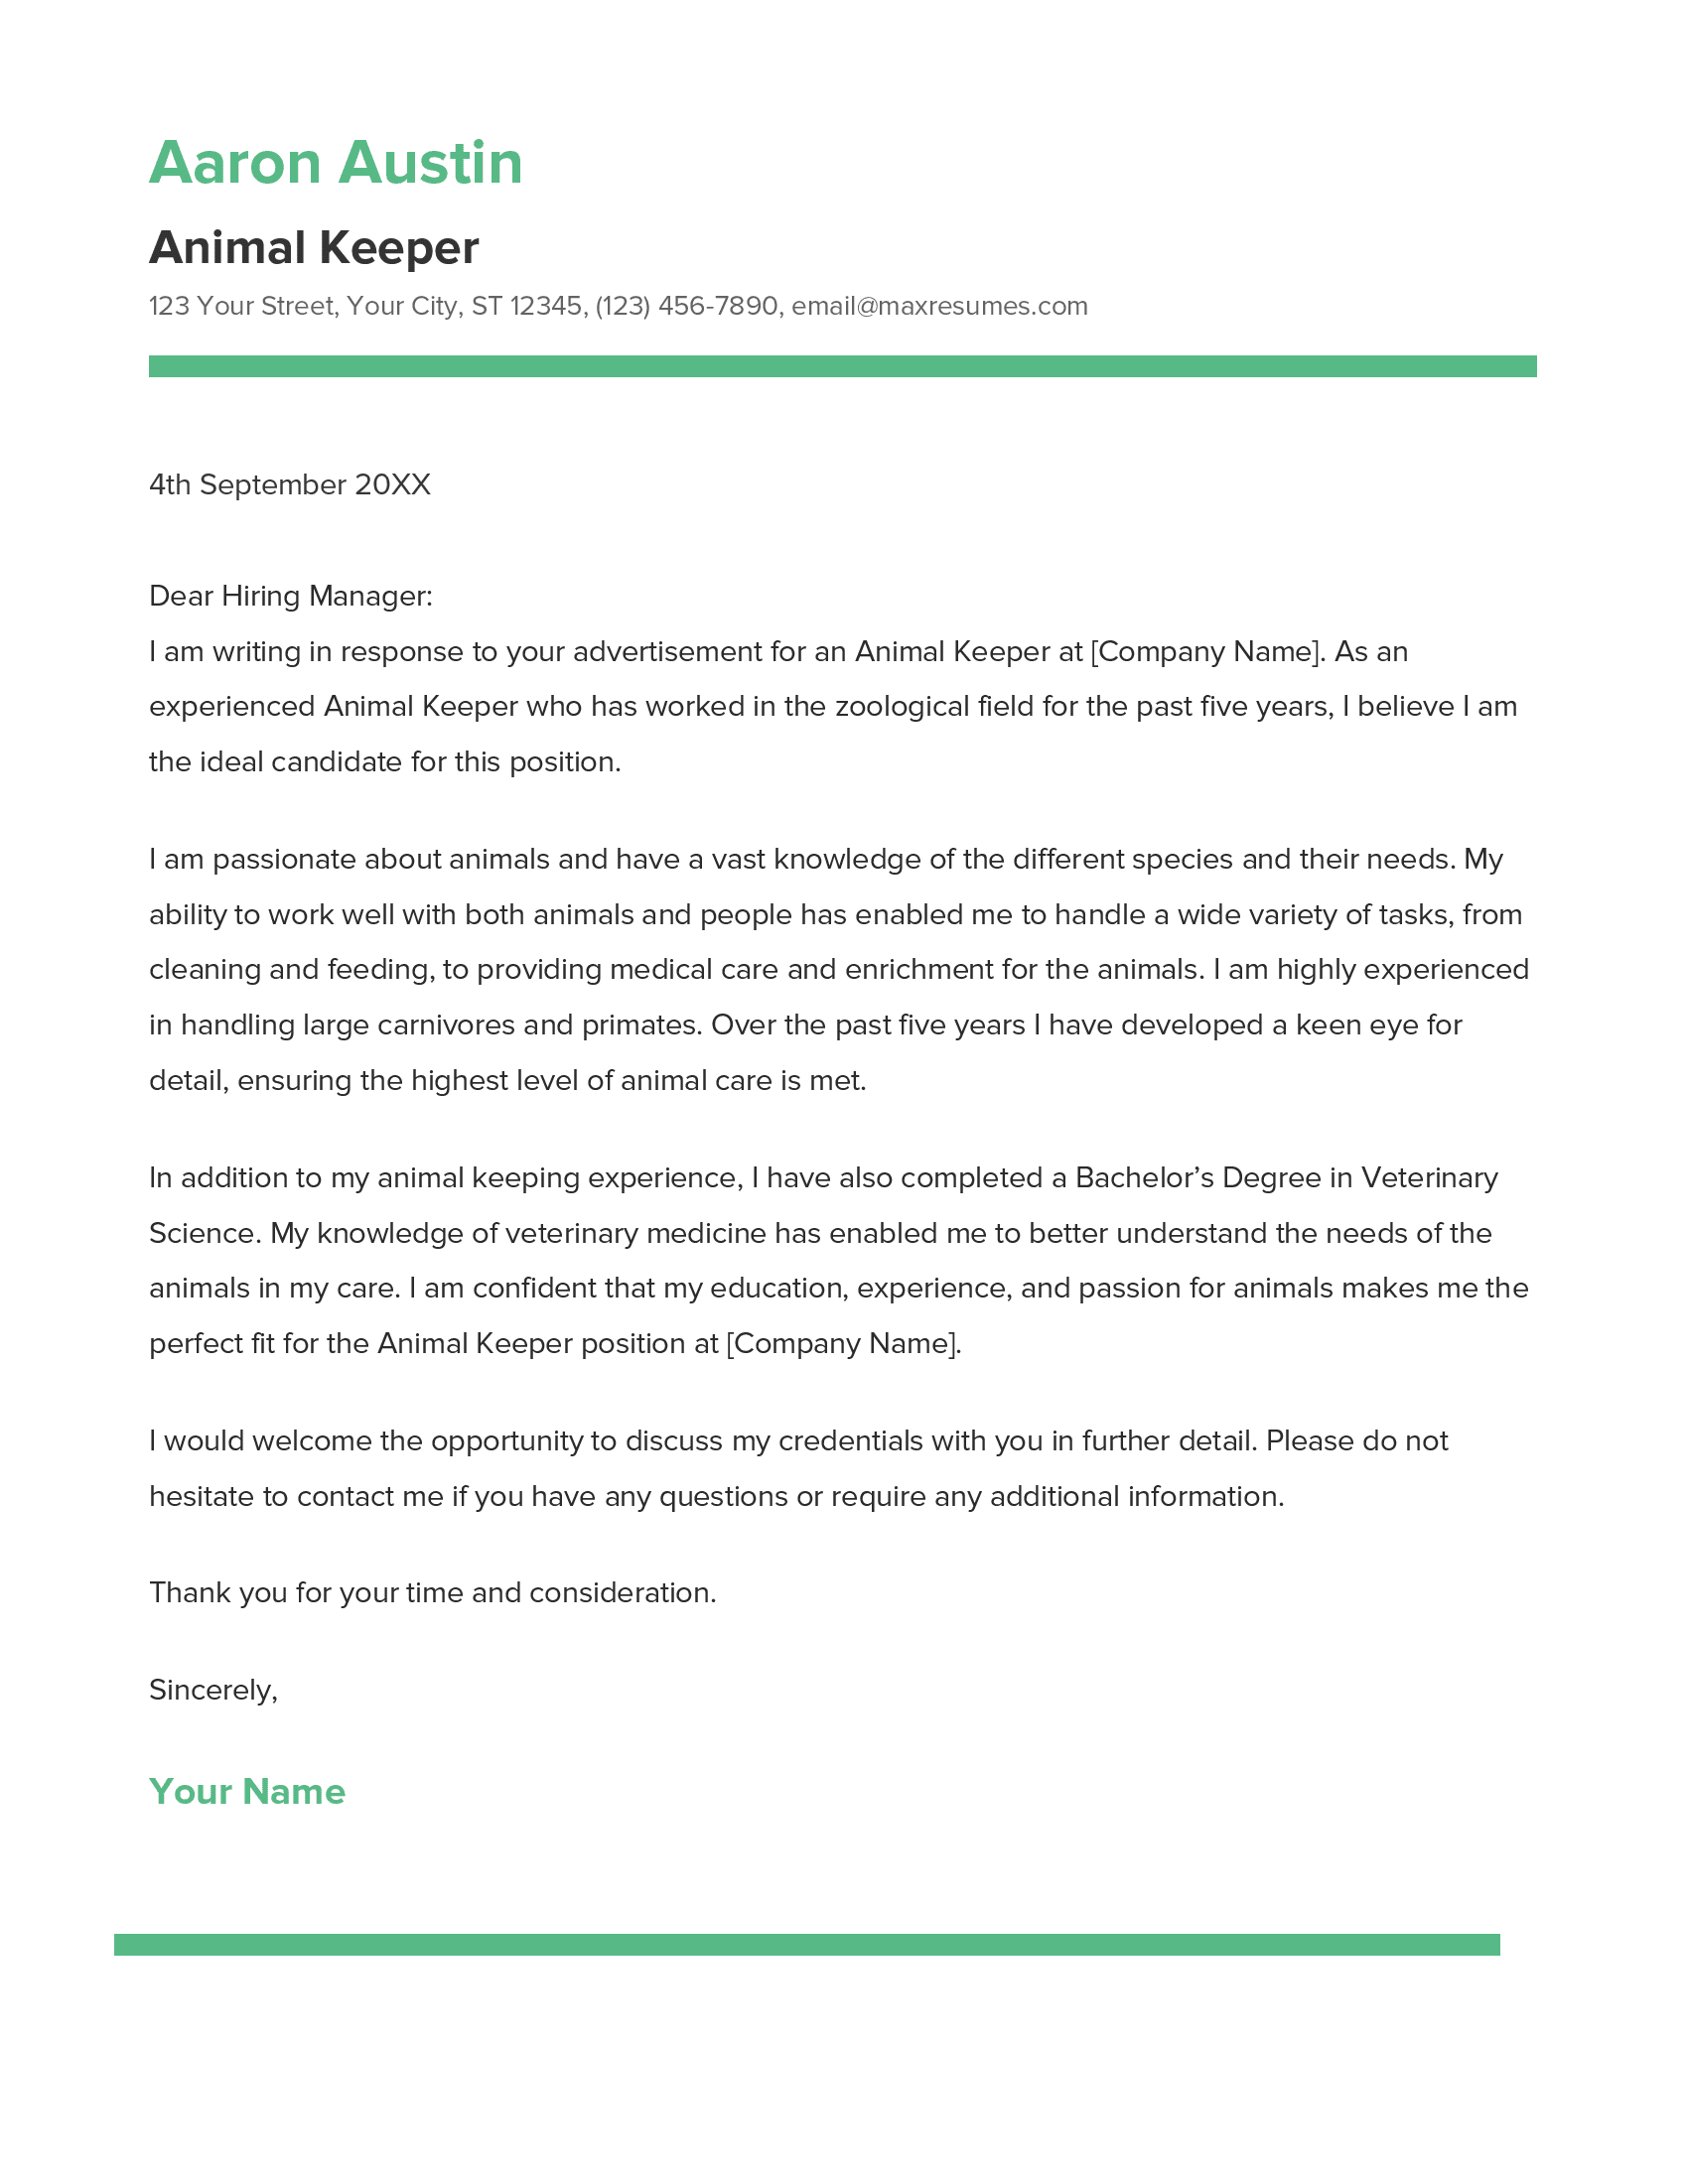 Animal Keeper Cover Letter Example